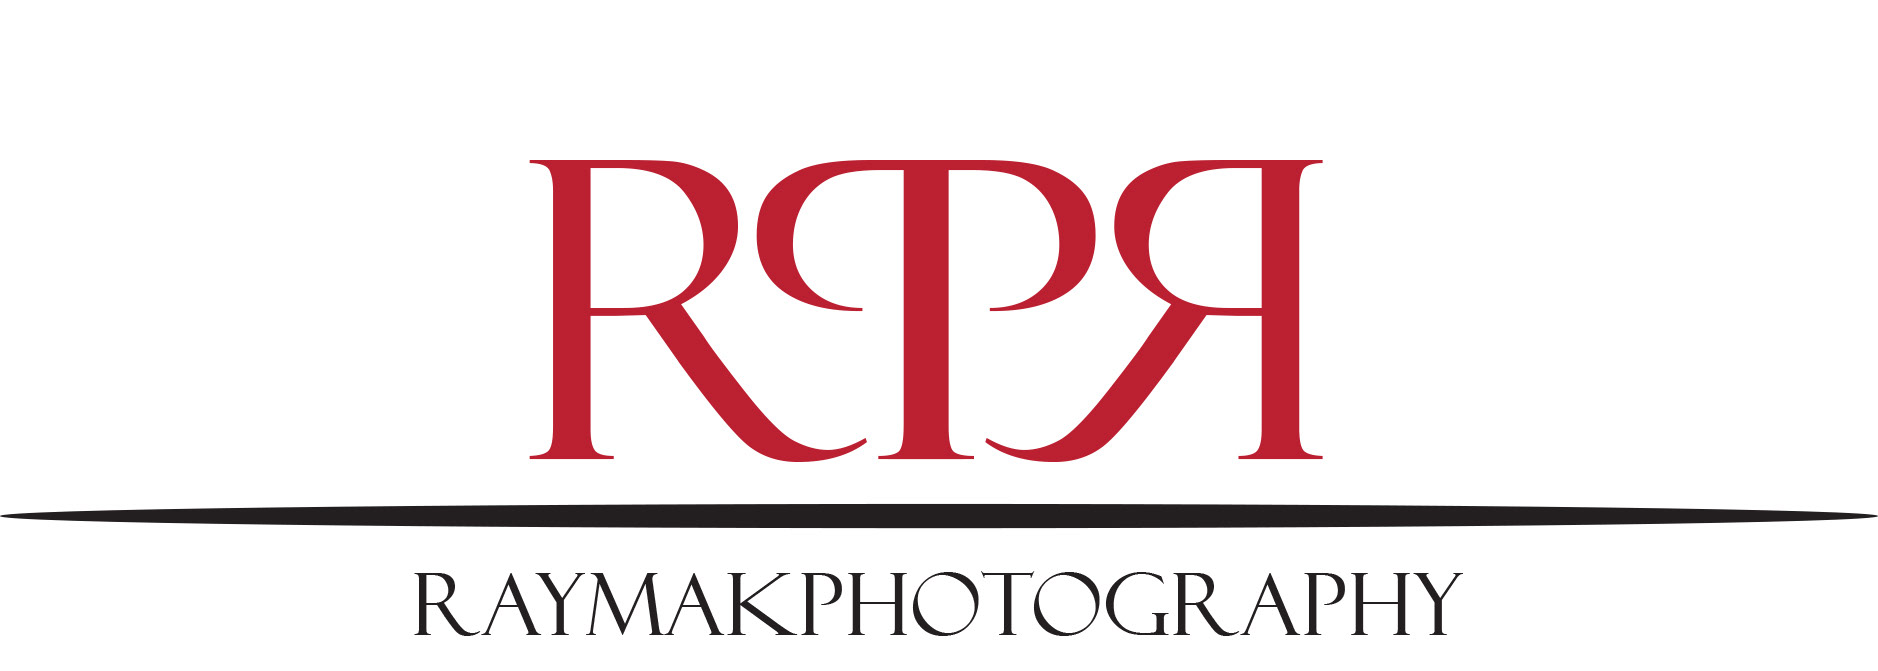 RaymakPhotography